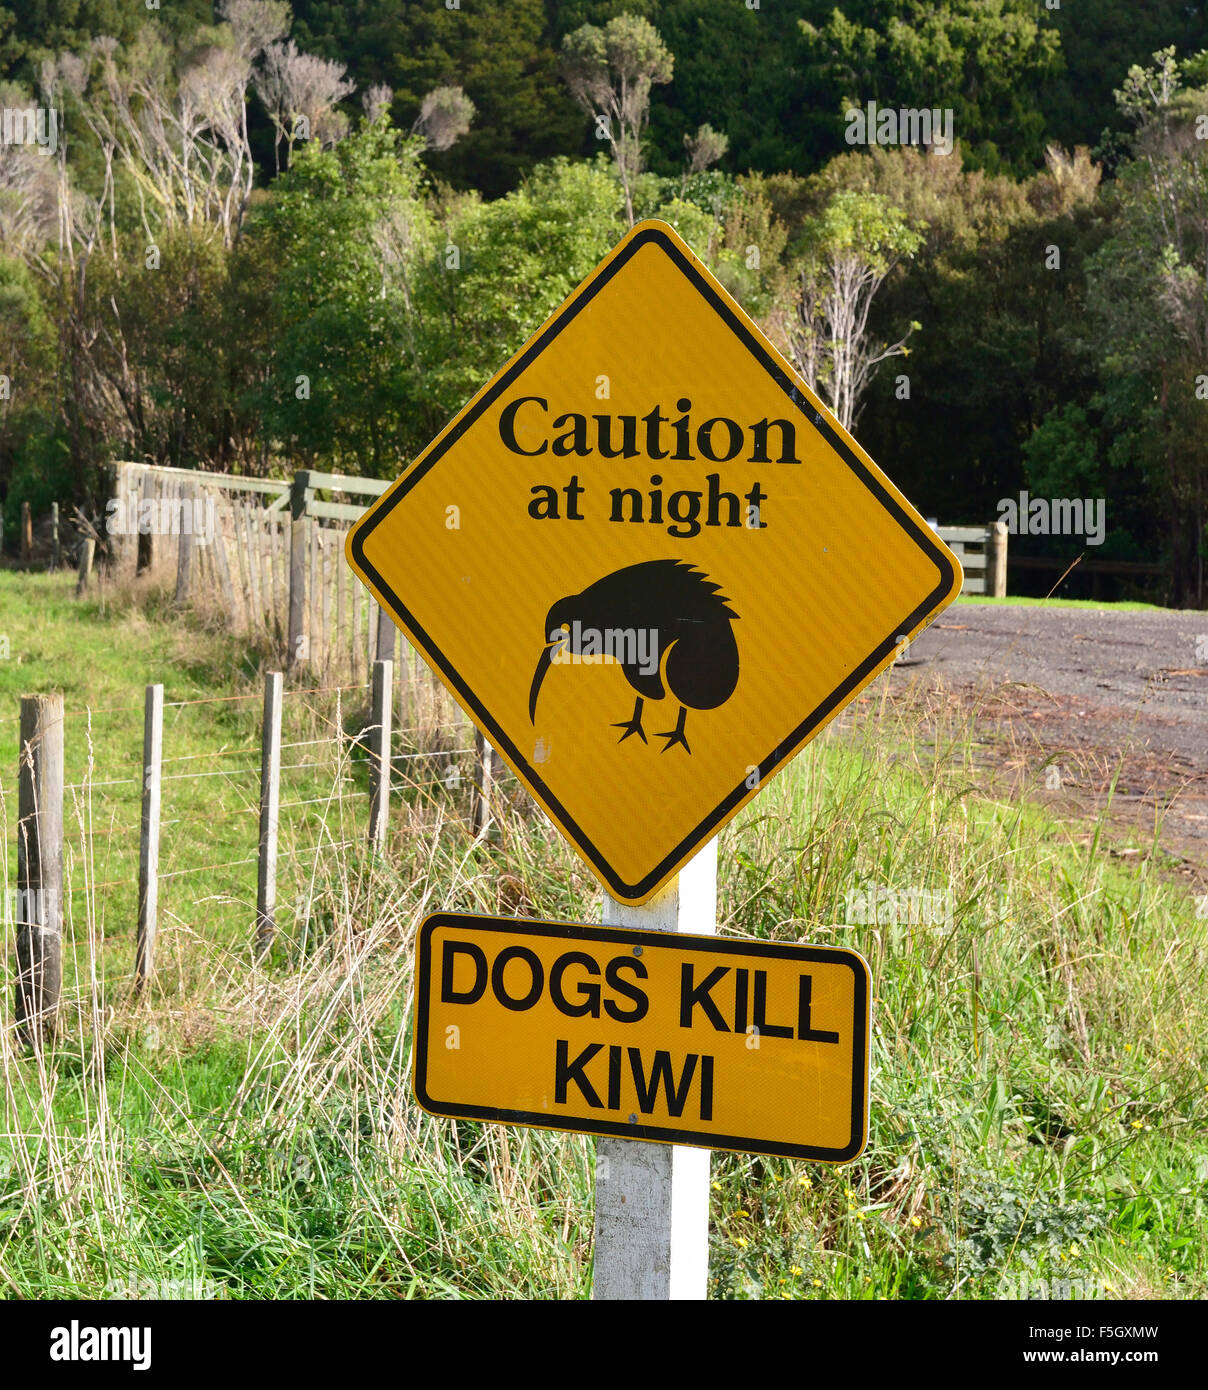 Caution road sign plus secondary advice for preventing deaths of Kiwi birds around their habitat in Trounson Kauri Park, North Island, New Zealand Stock Photo